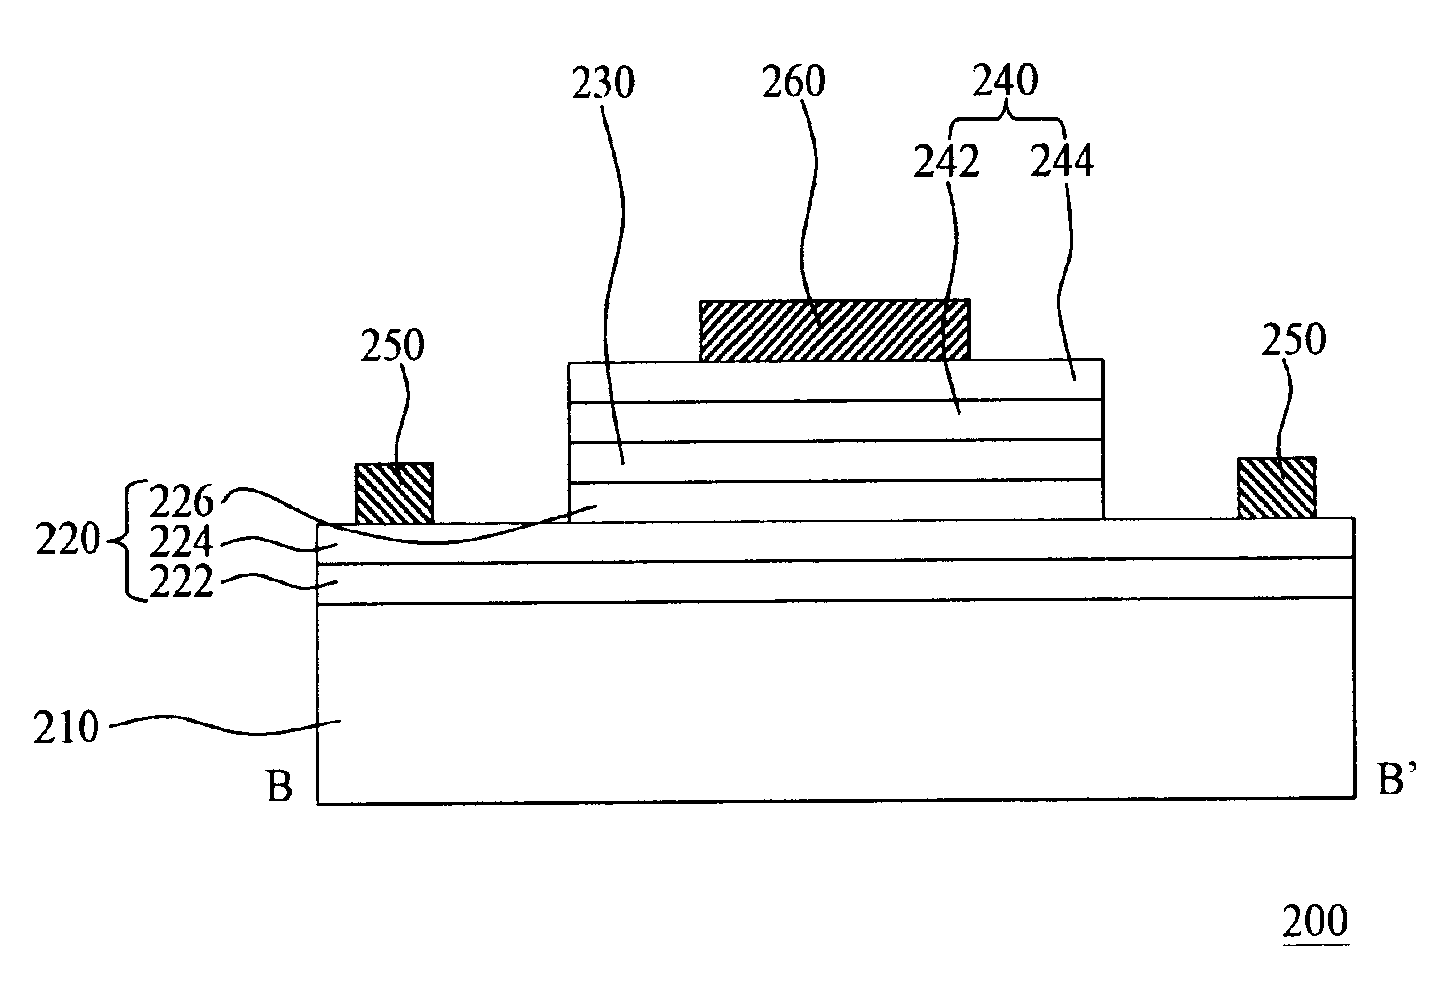 Light emitting diode chip with double close-loop electrode design